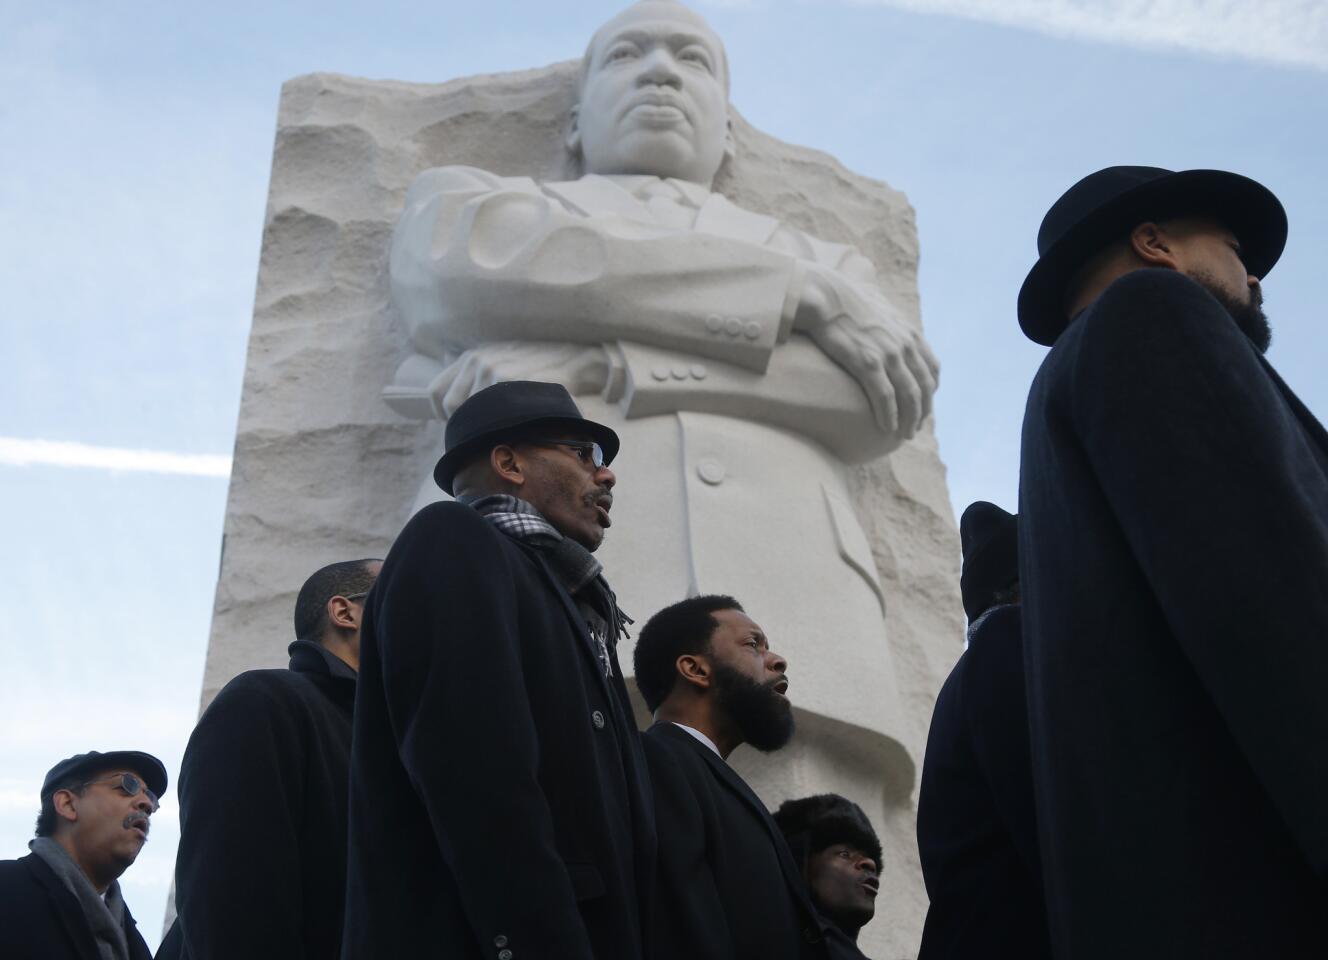 Remembering Martin Luther King, Jr.